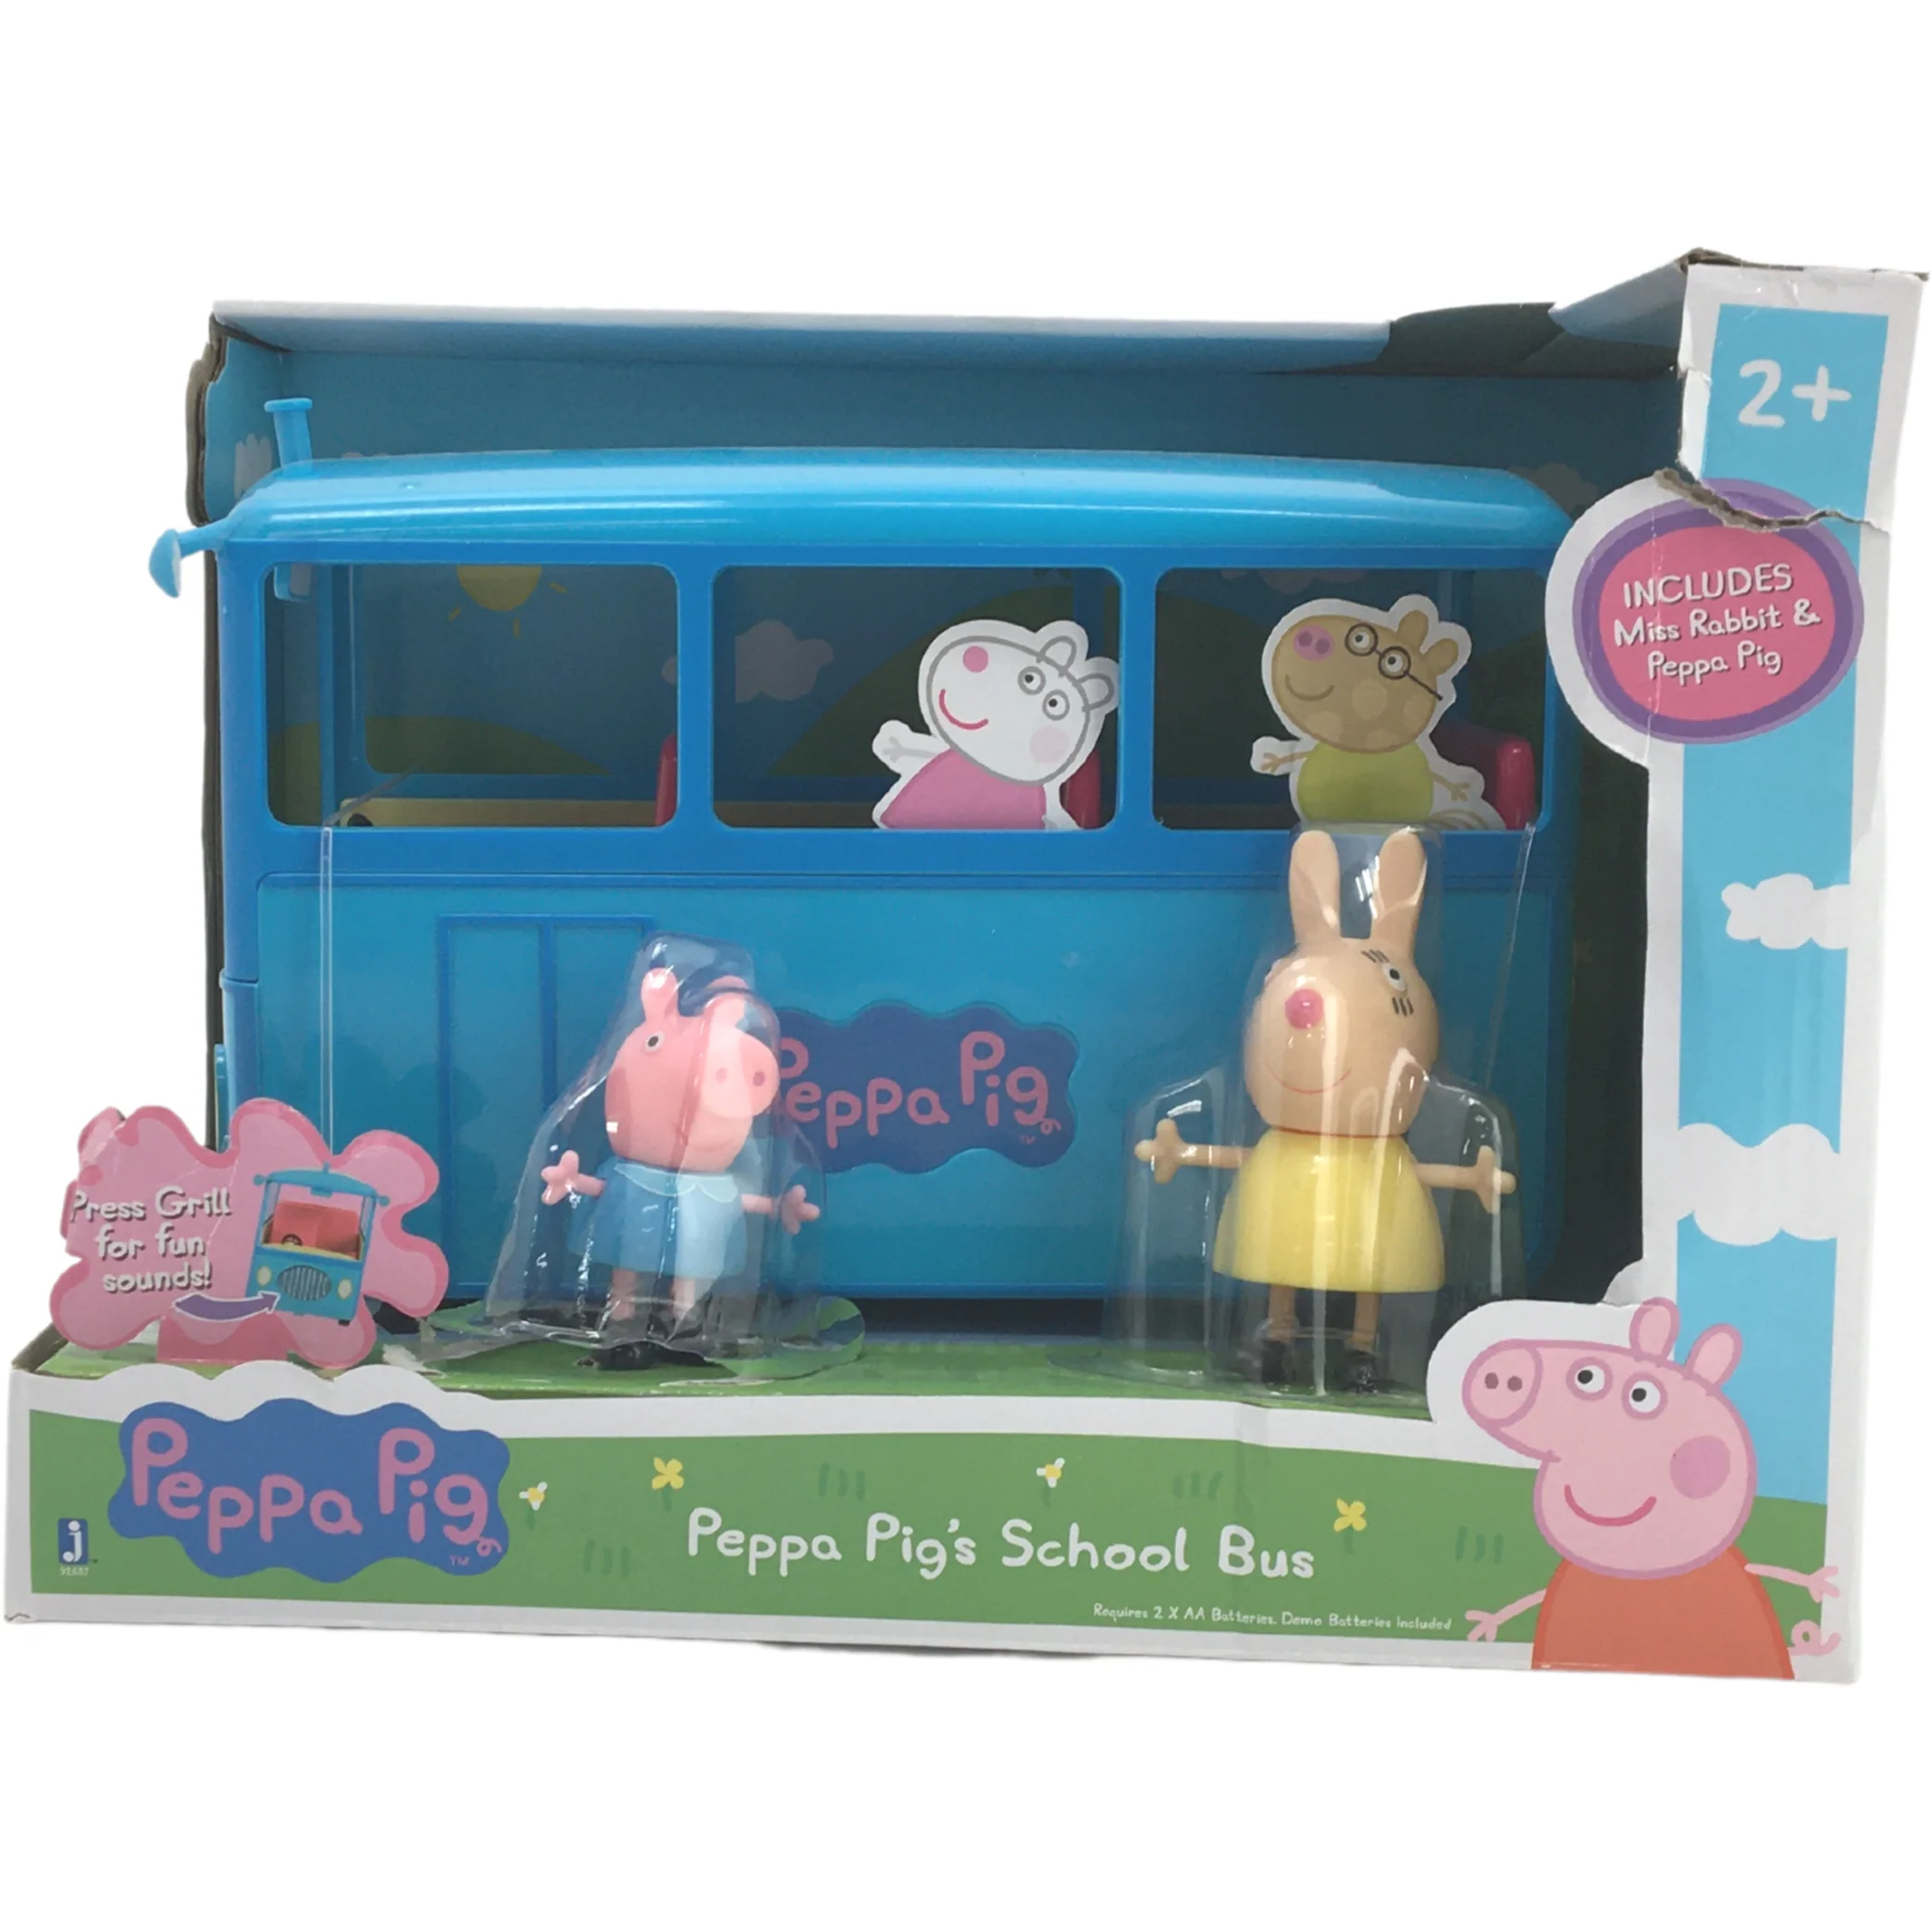 Peppa Pig's Singing School Bus /Sound and Music / Bus with Characters / Age 2+